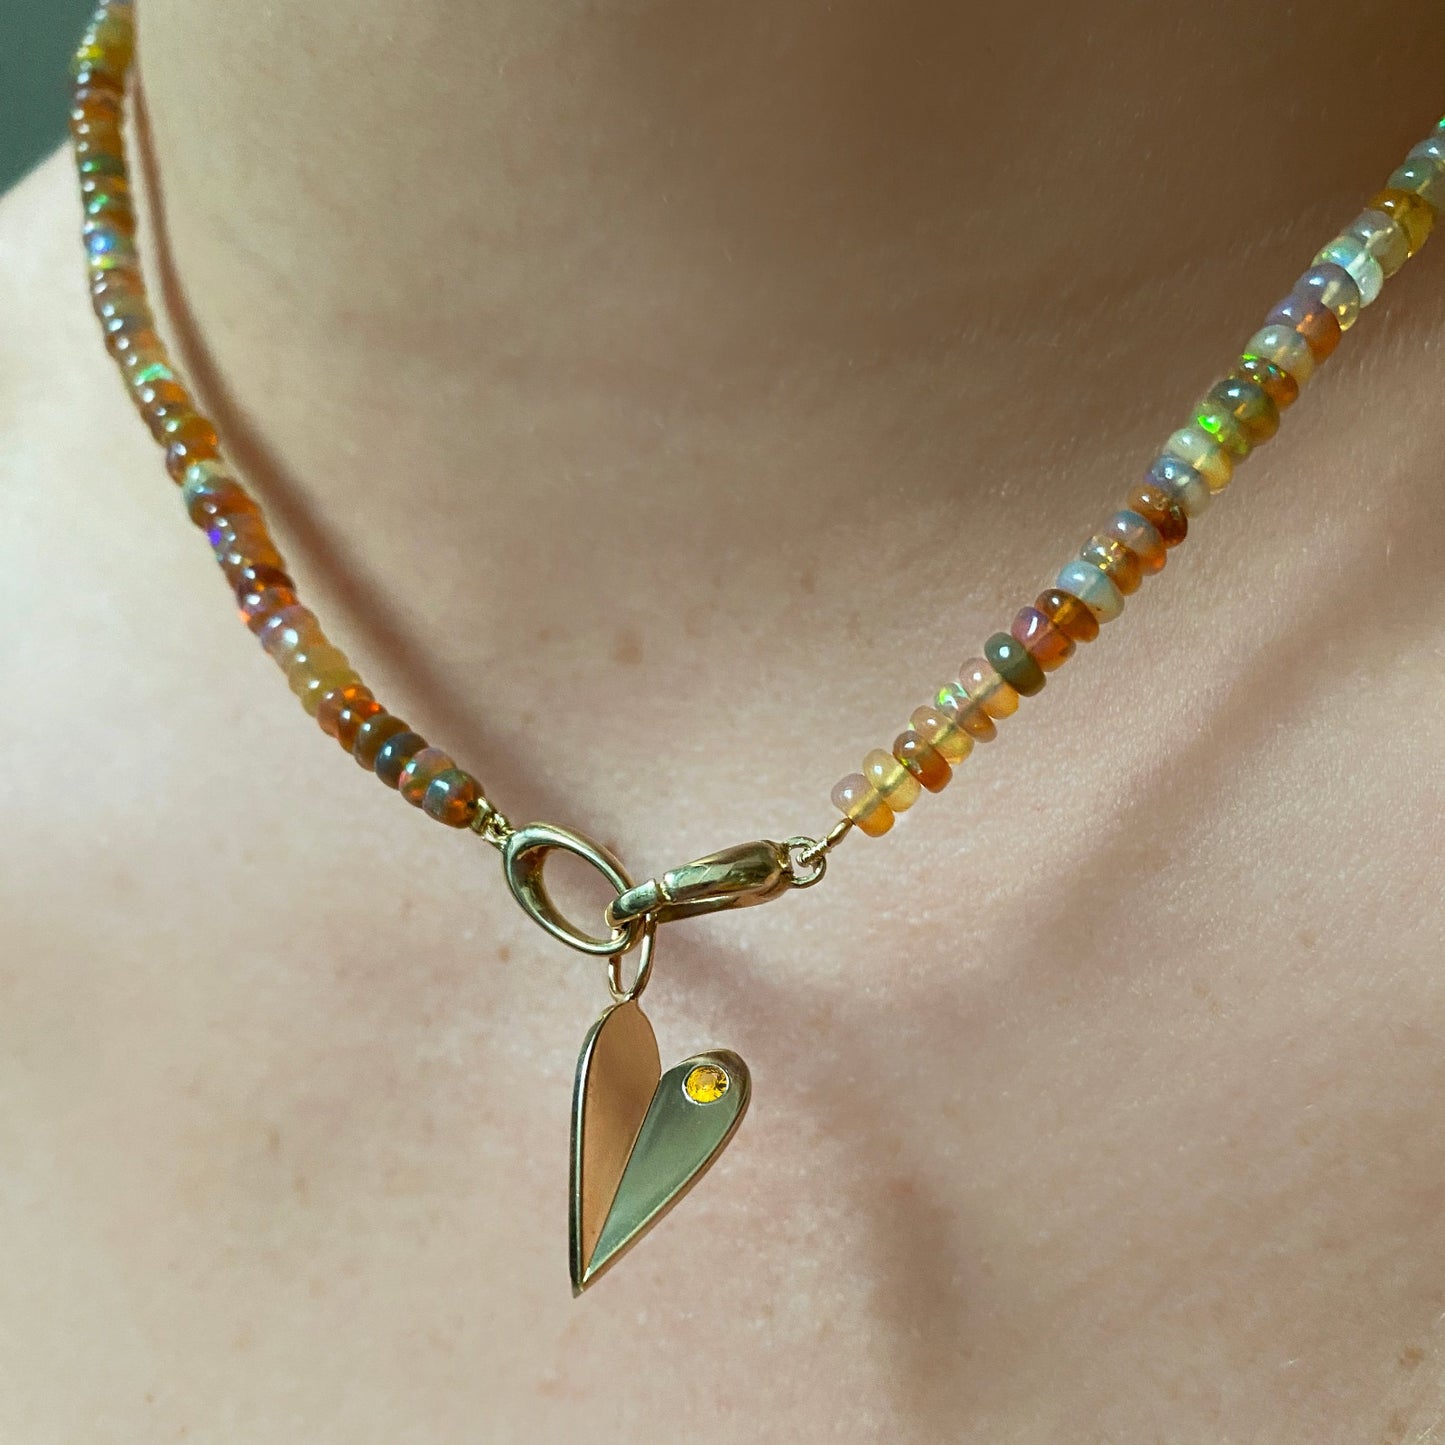 Shimmering beaded necklace made of smooth opal rondels in shades of light yellow, light orange, white, and brown on a slim gold lobster clasp. Styled on a neck layered with a folded heart charm.